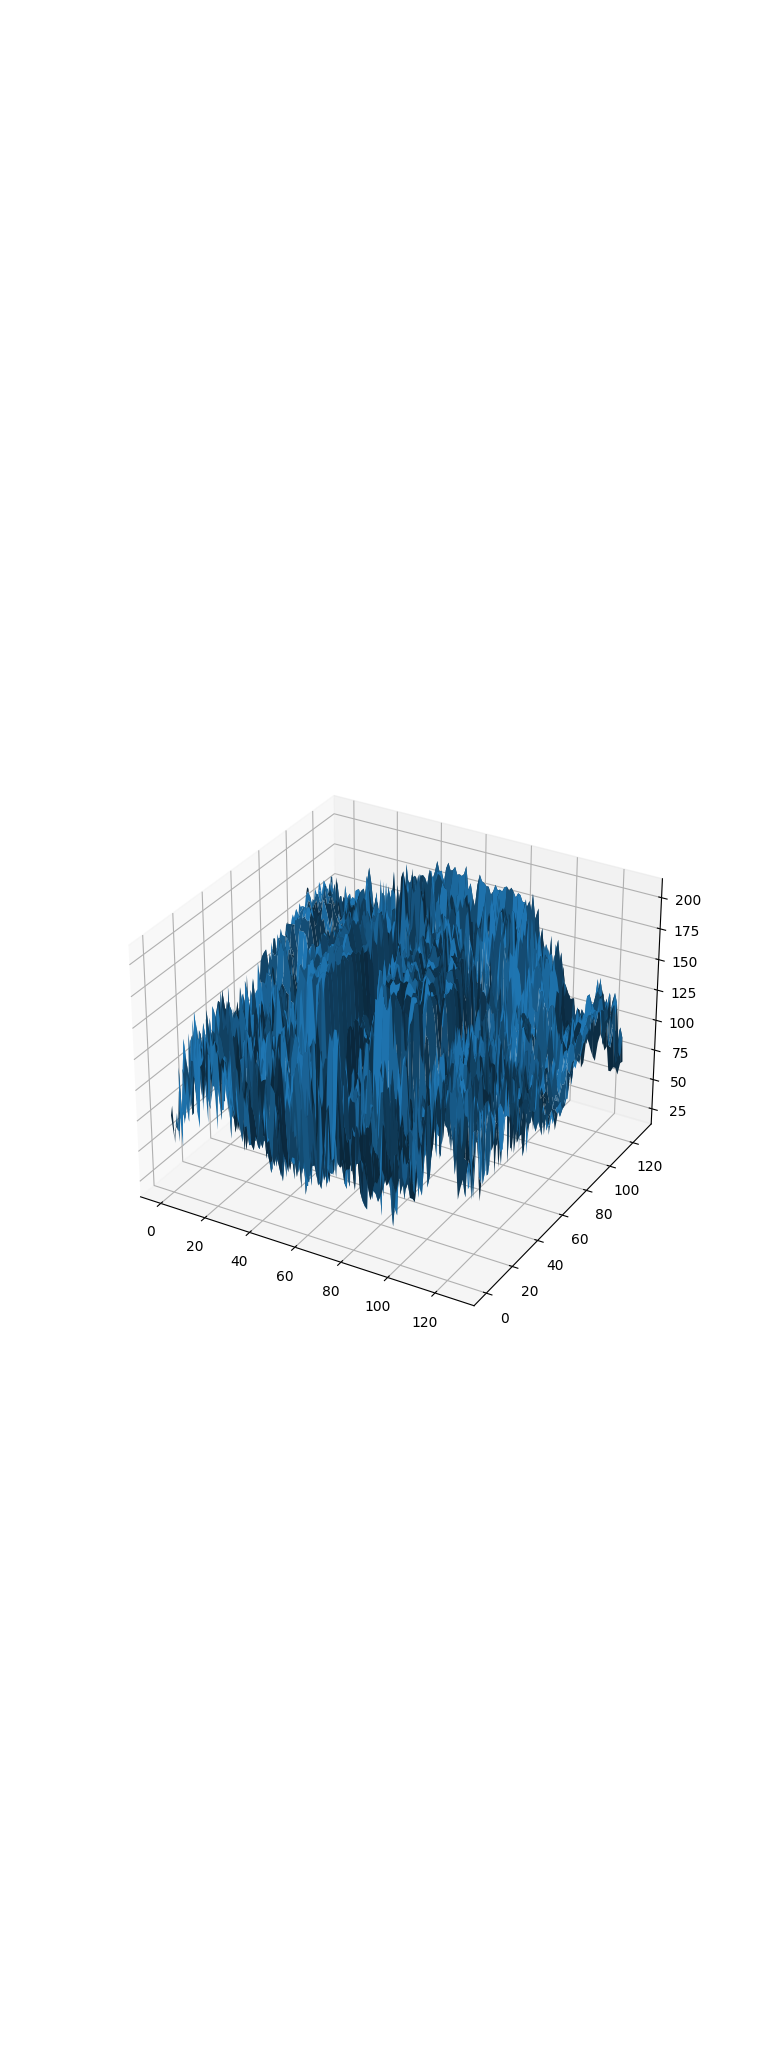 3D surface plot of the image signal